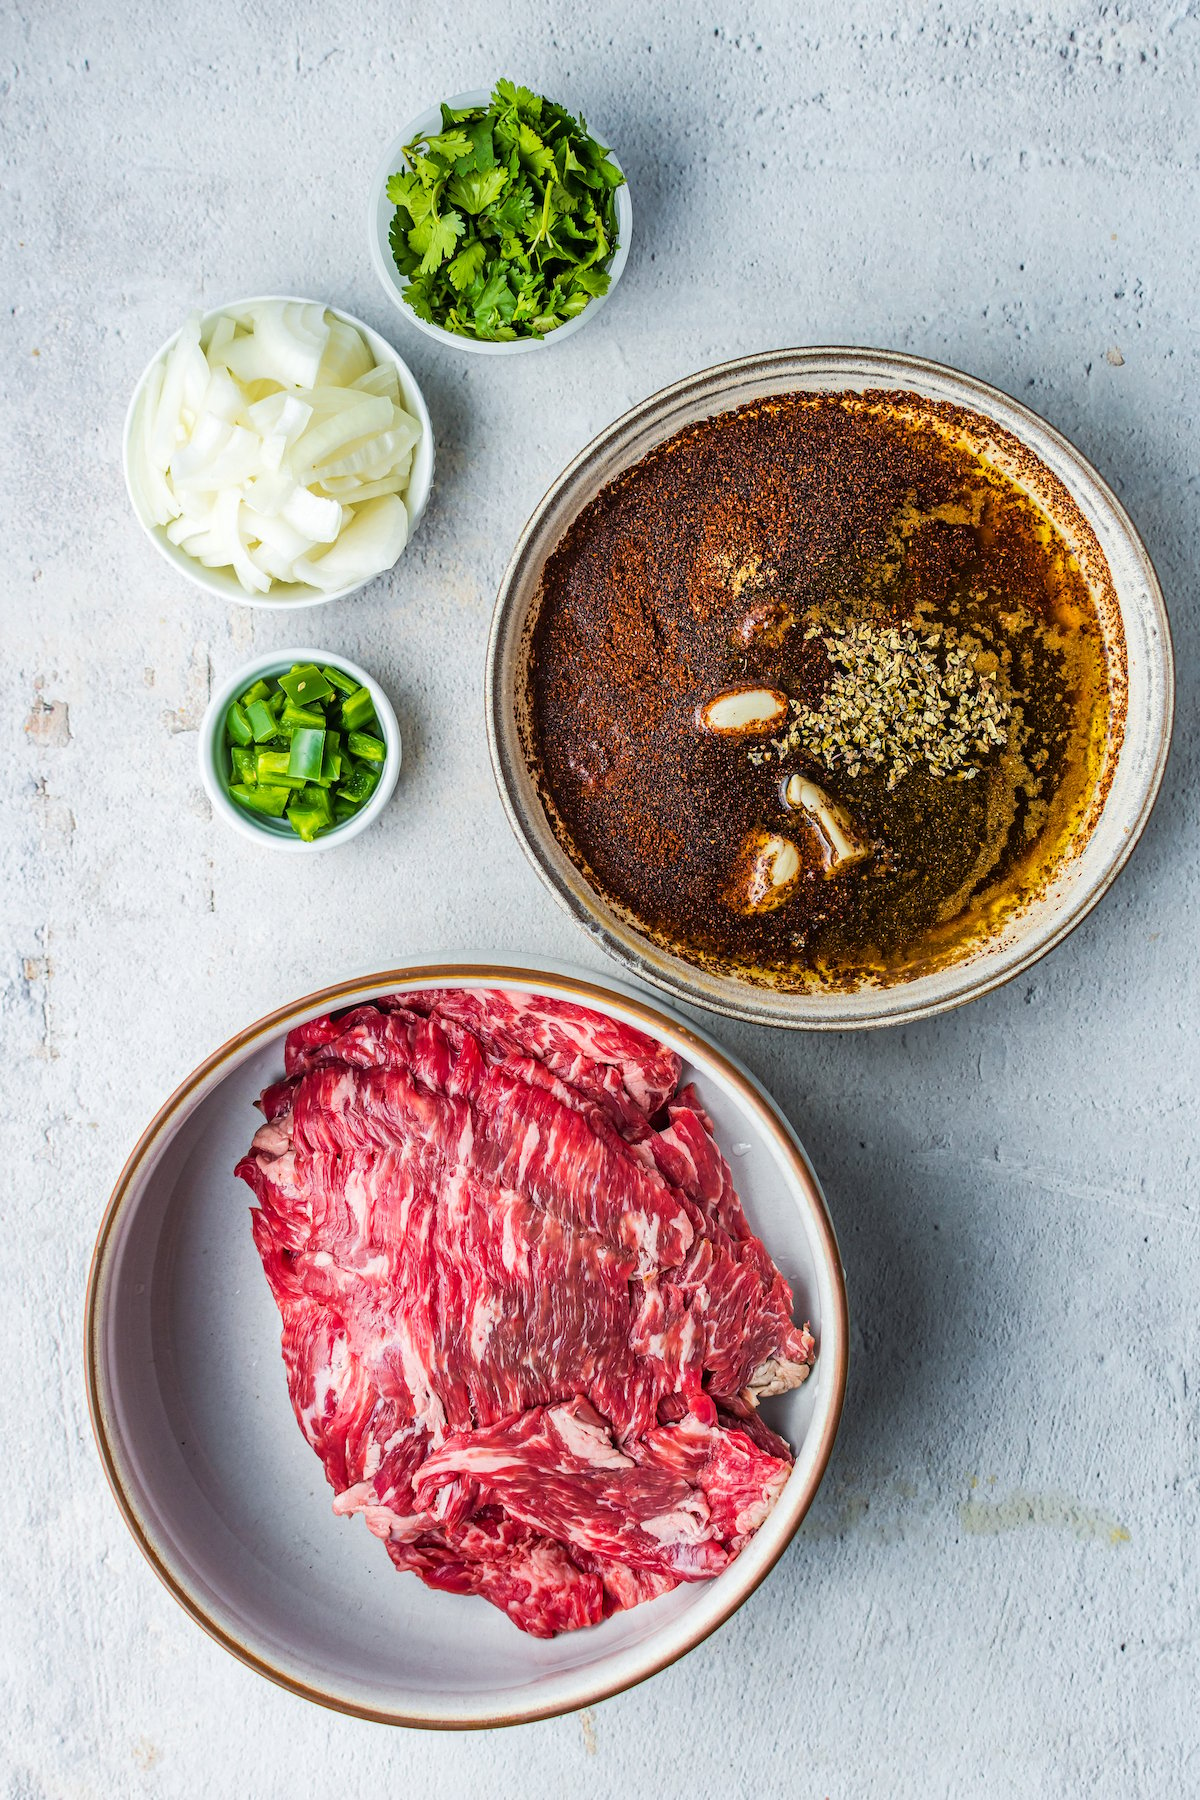 A dish of flank steak next to a bowl of marinade ingredients, a dish of jalapeno, a dish of chopped onion, and a dish of cilantro.